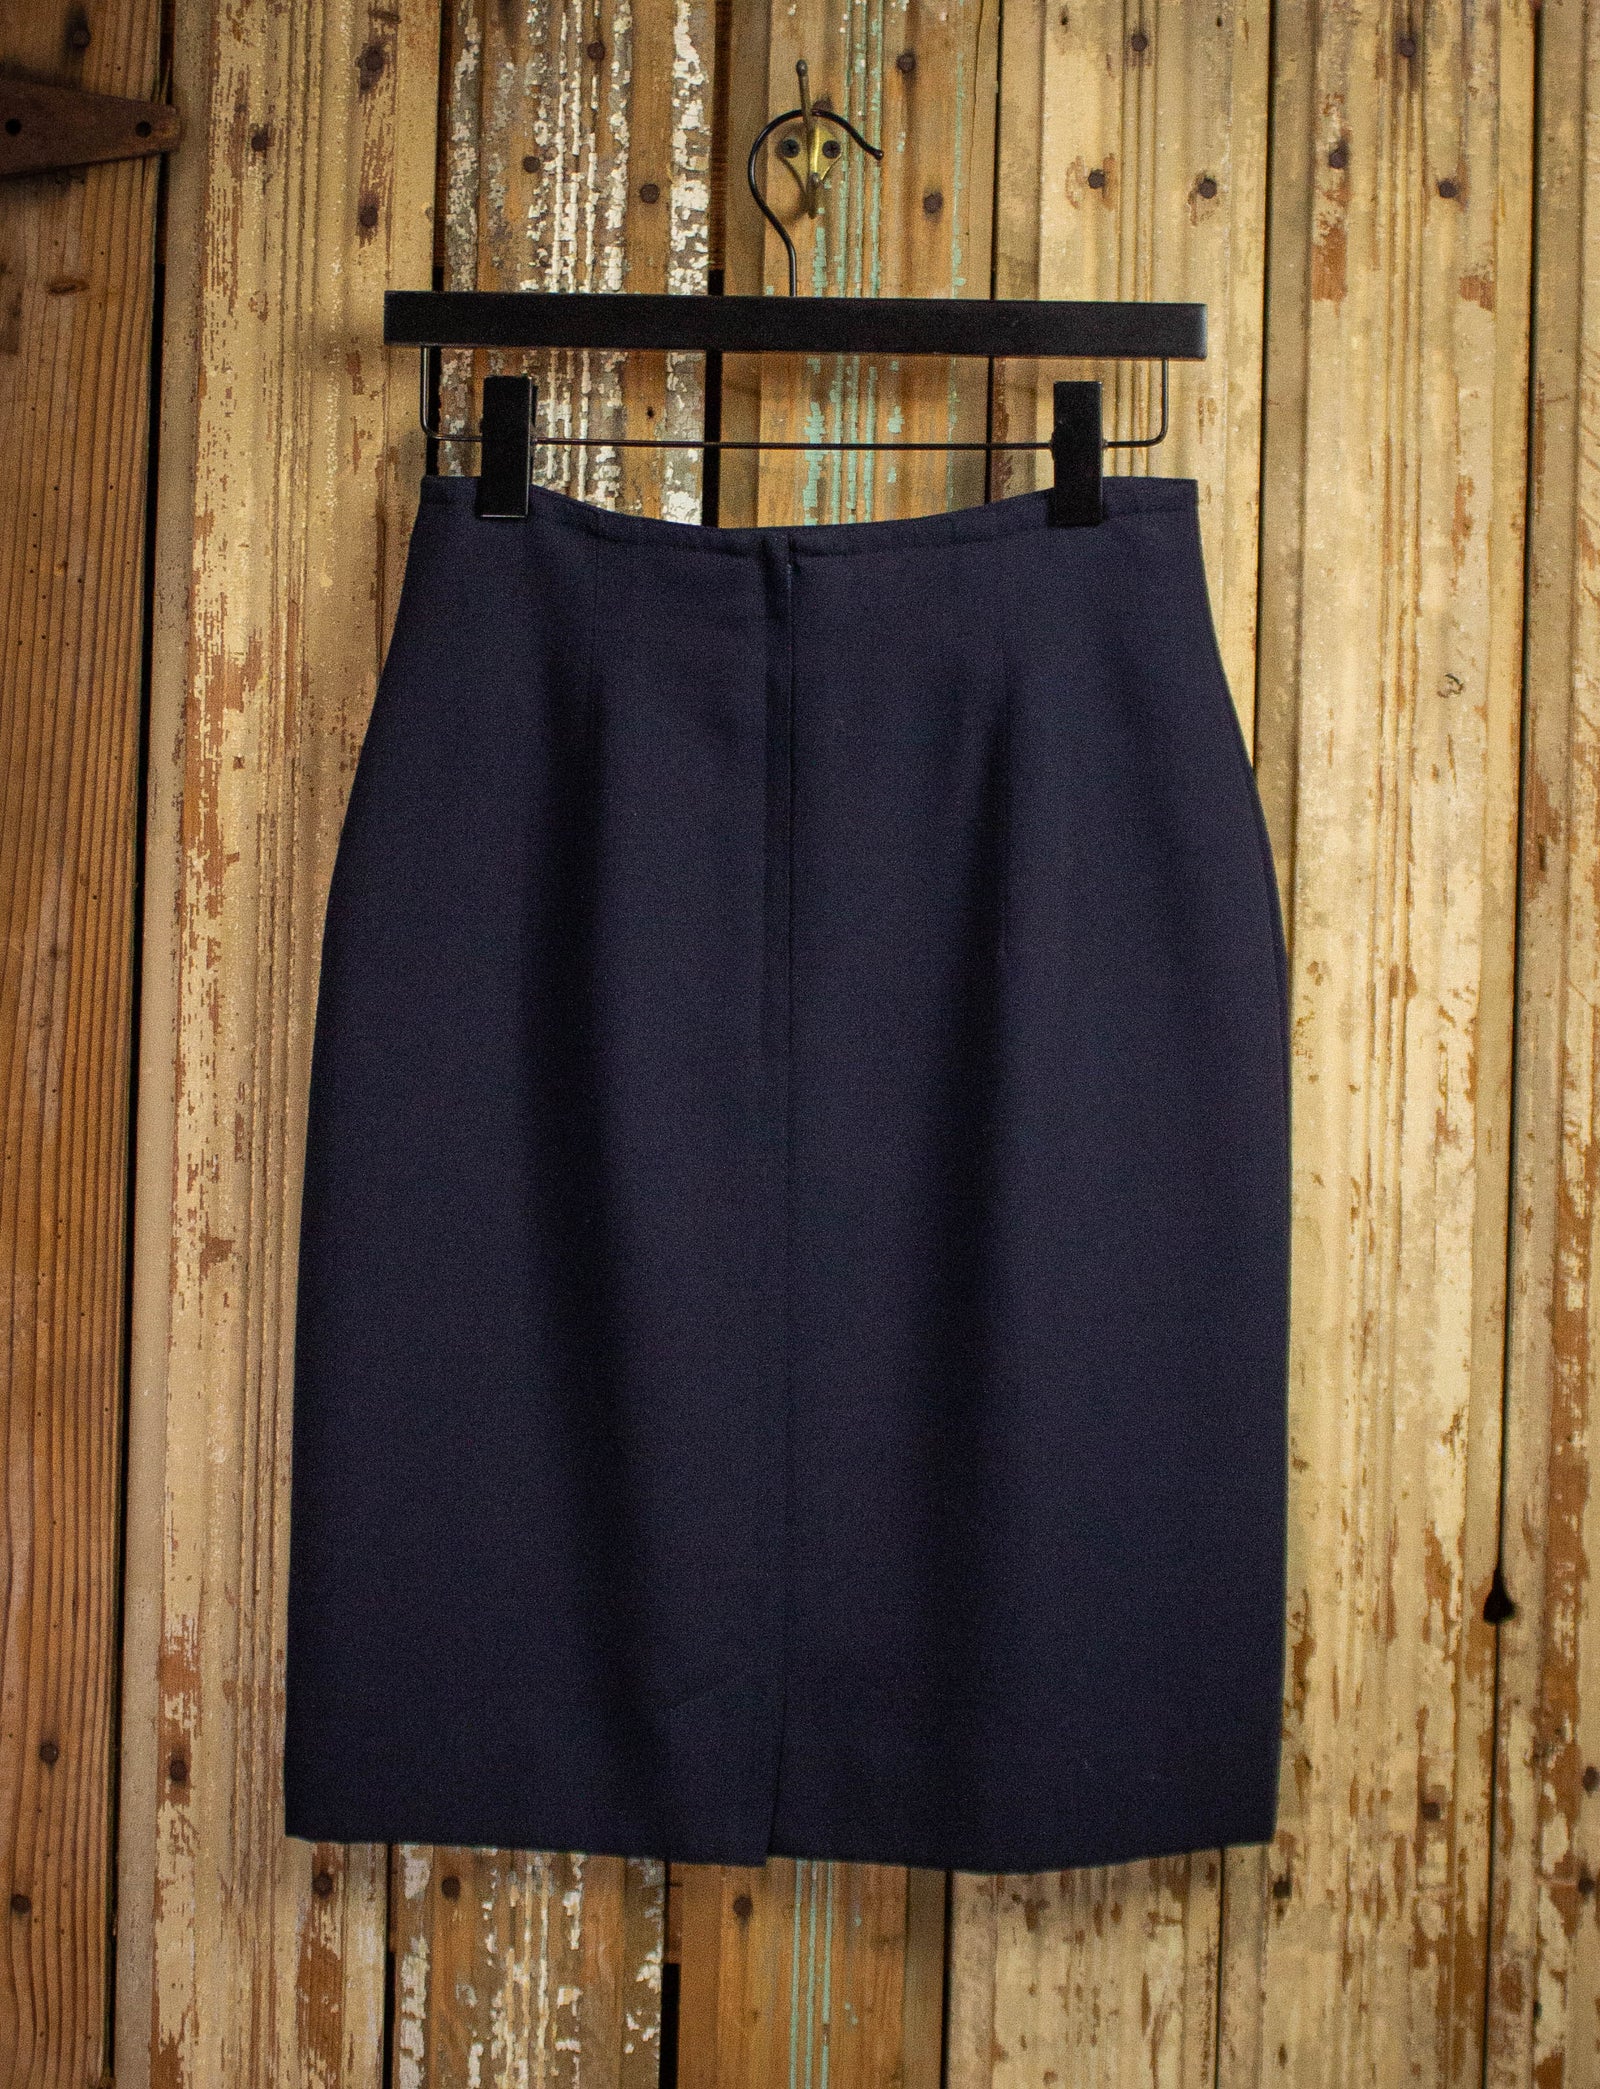 Vintage Mondi Navy Blue Skirt with Gold Buttons 80s 27w